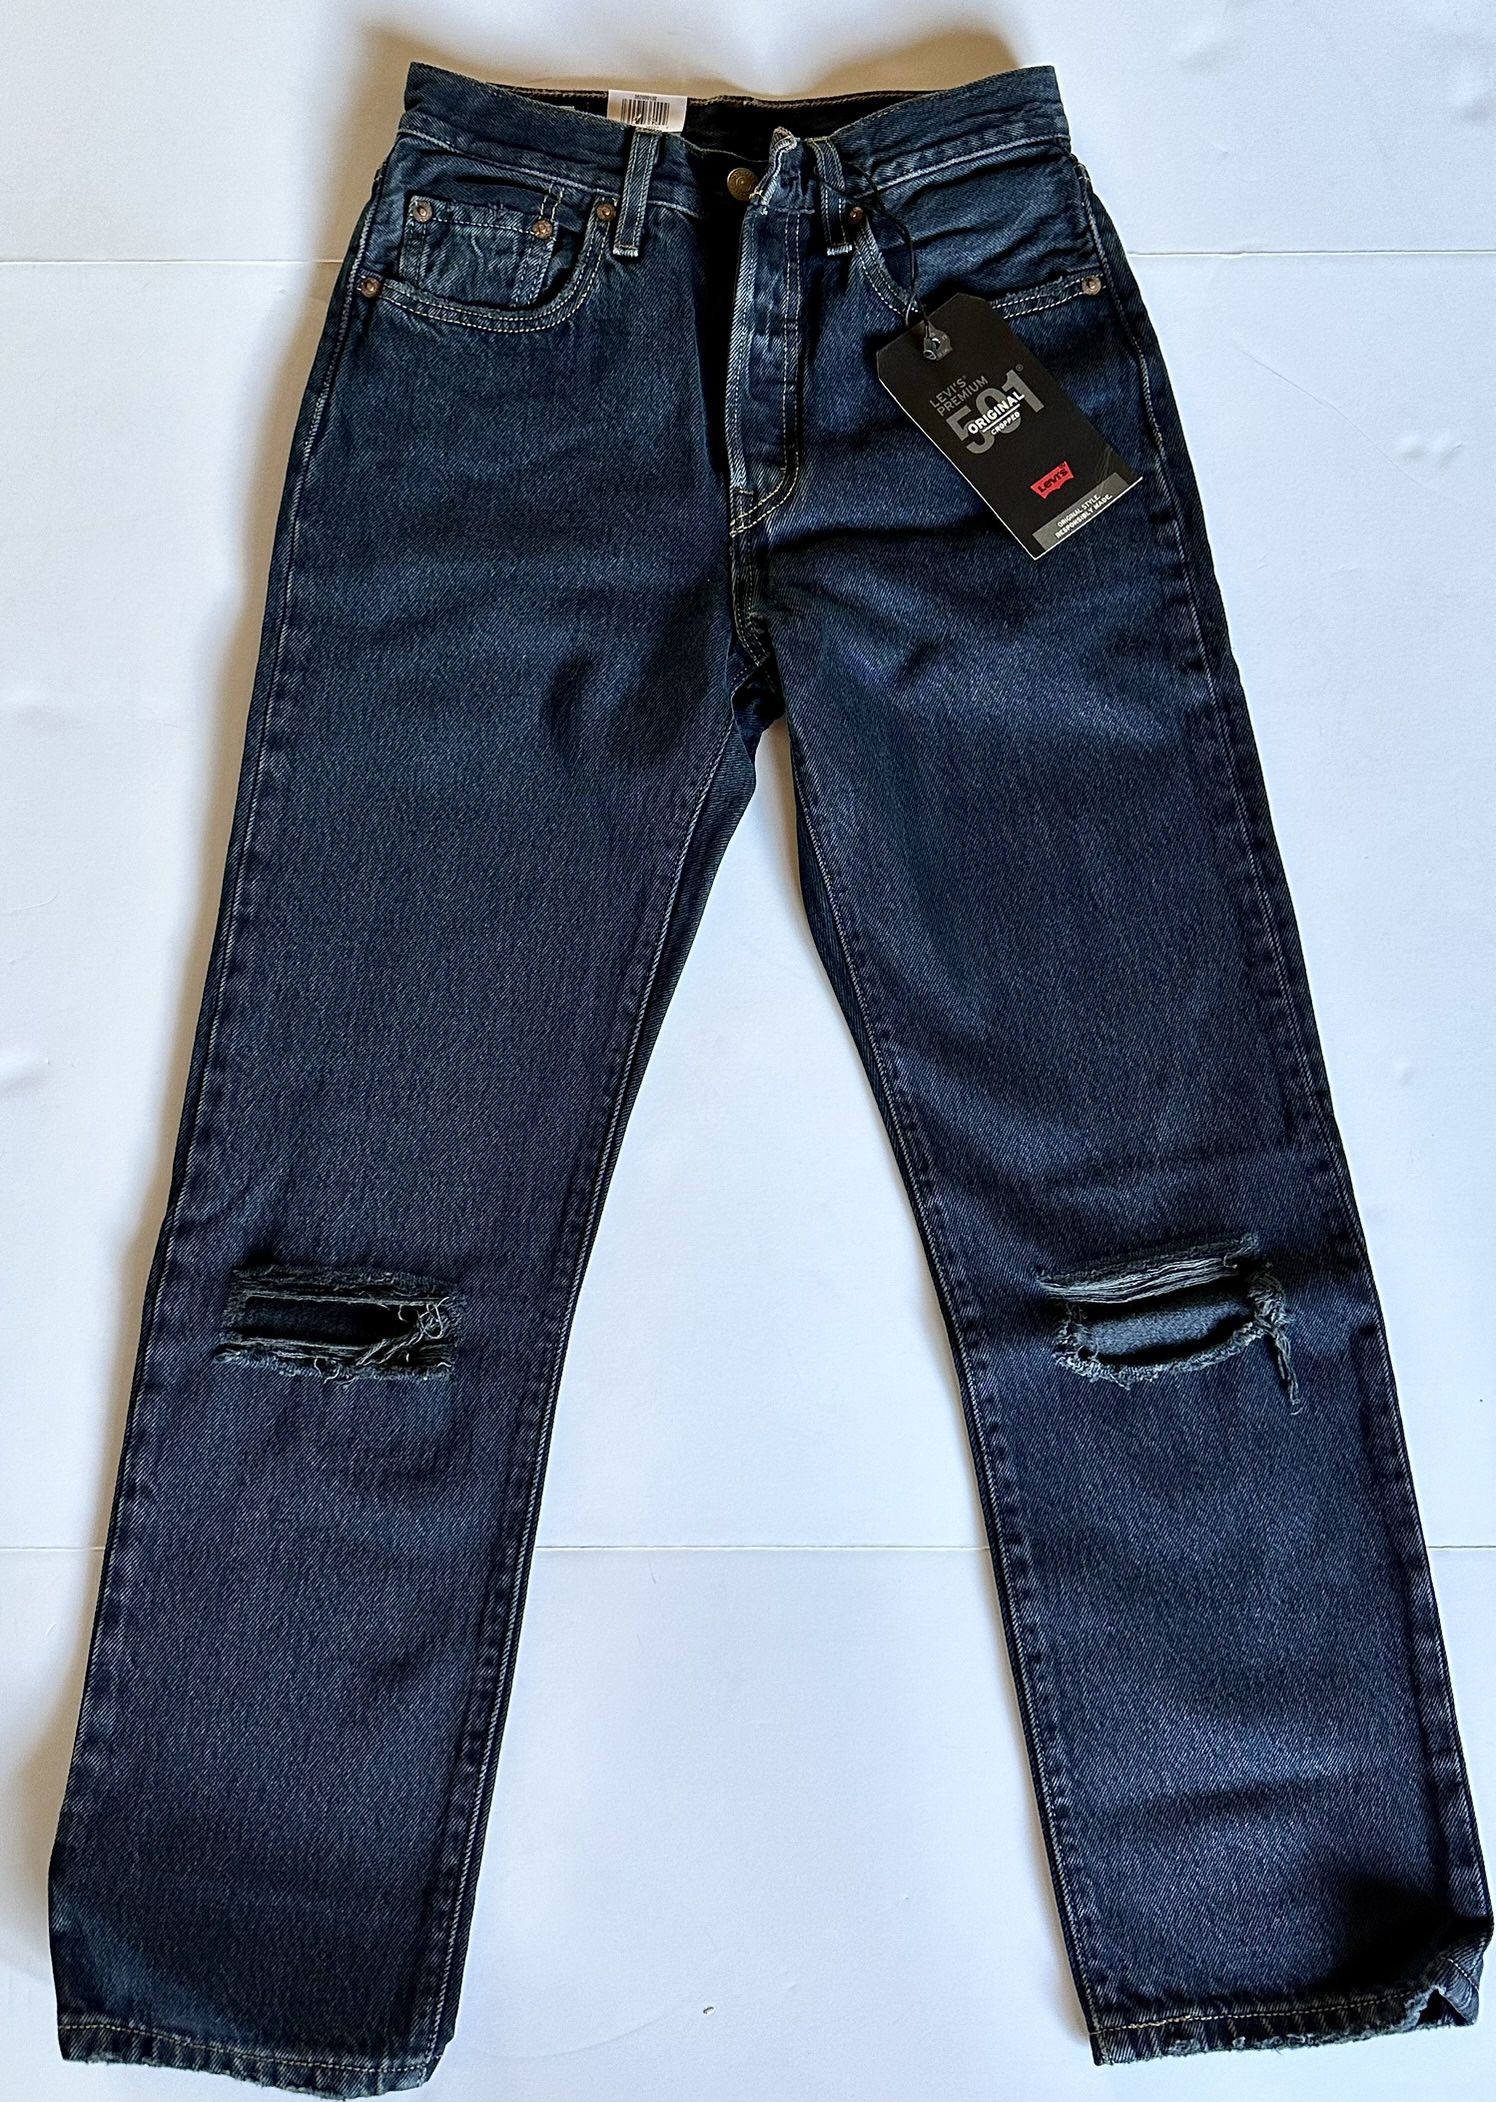 Original Levi’s 501 CROPPED Jeans BRAND NEW With Tags